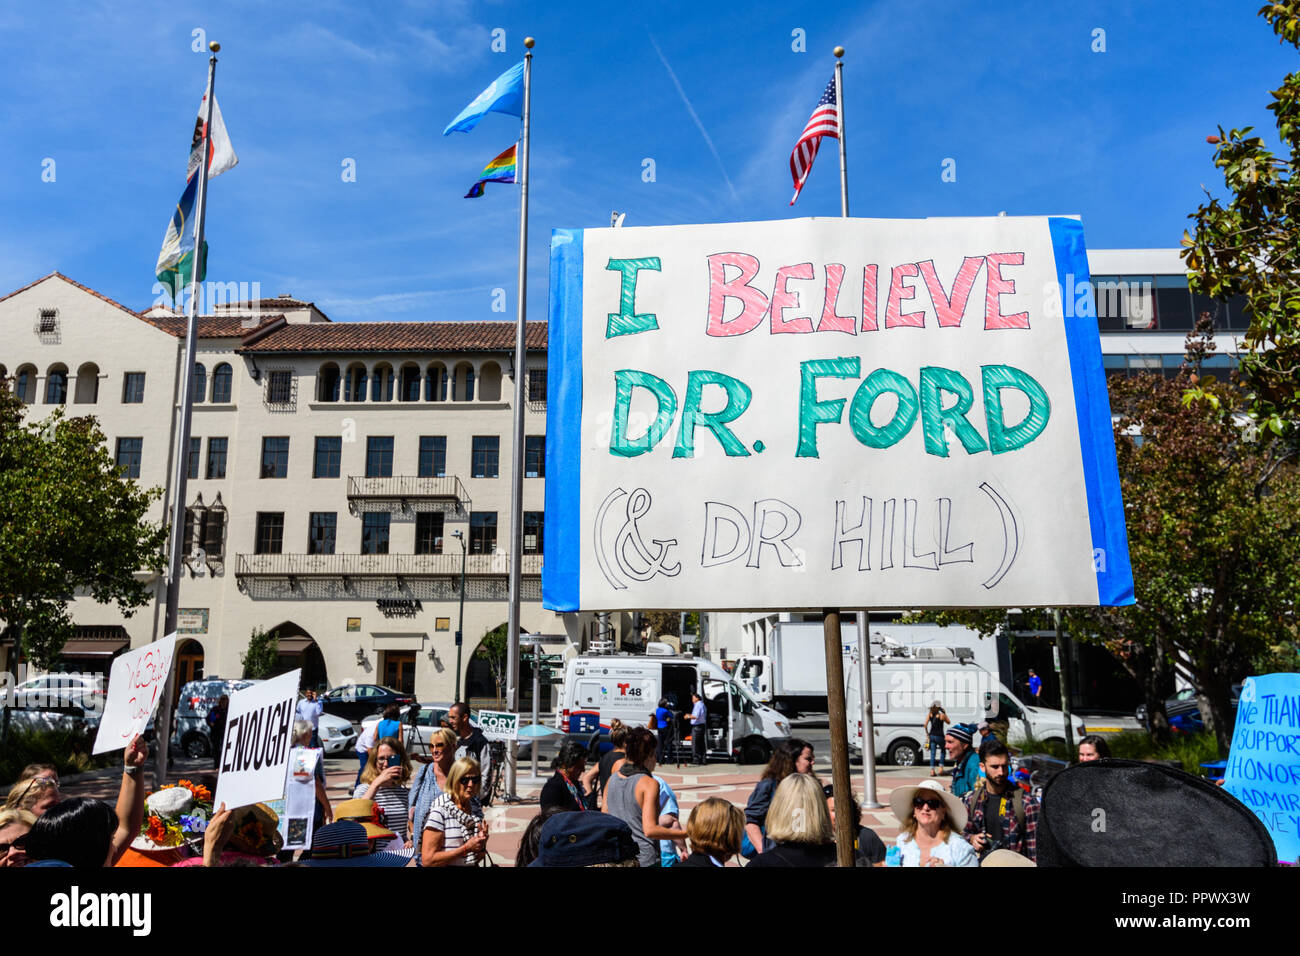 September 27, 2018 Palo Alto / CA / USA - Rally in support of Christine Blasey Ford in front of the Palo Alto City Hall; 'I believe Dr Ford & Dr Hill' Stock Photo